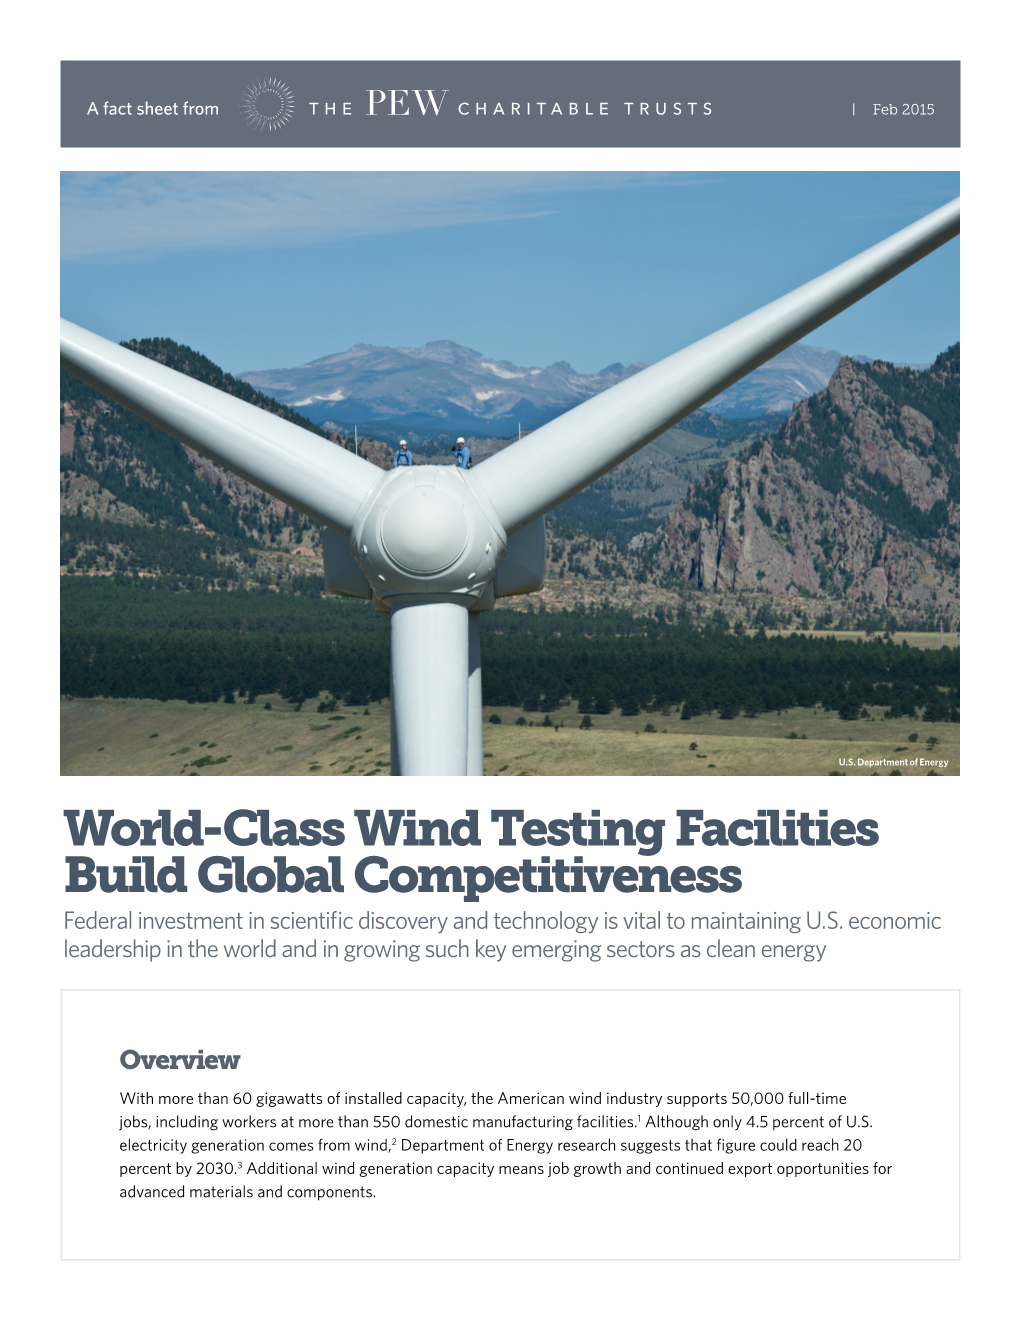 World-Class Wind Testing Facilities Build Global Competitiveness Federal Investment in Scientific Discovery and Technology Is Vital to Maintaining U.S